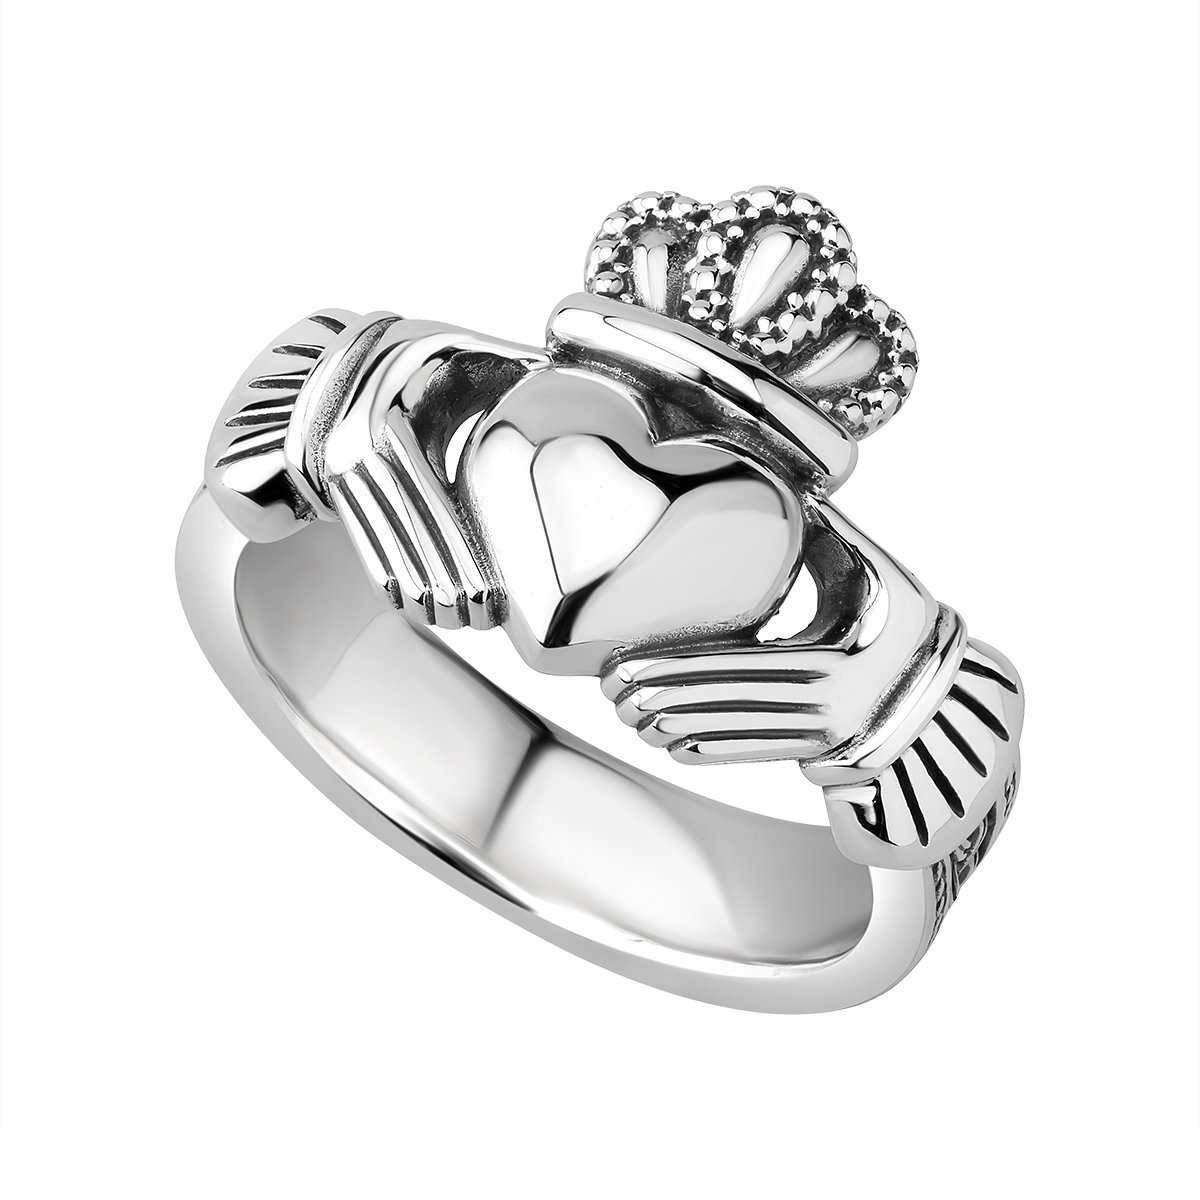 A silver claddagh ring with the crown on top of it.